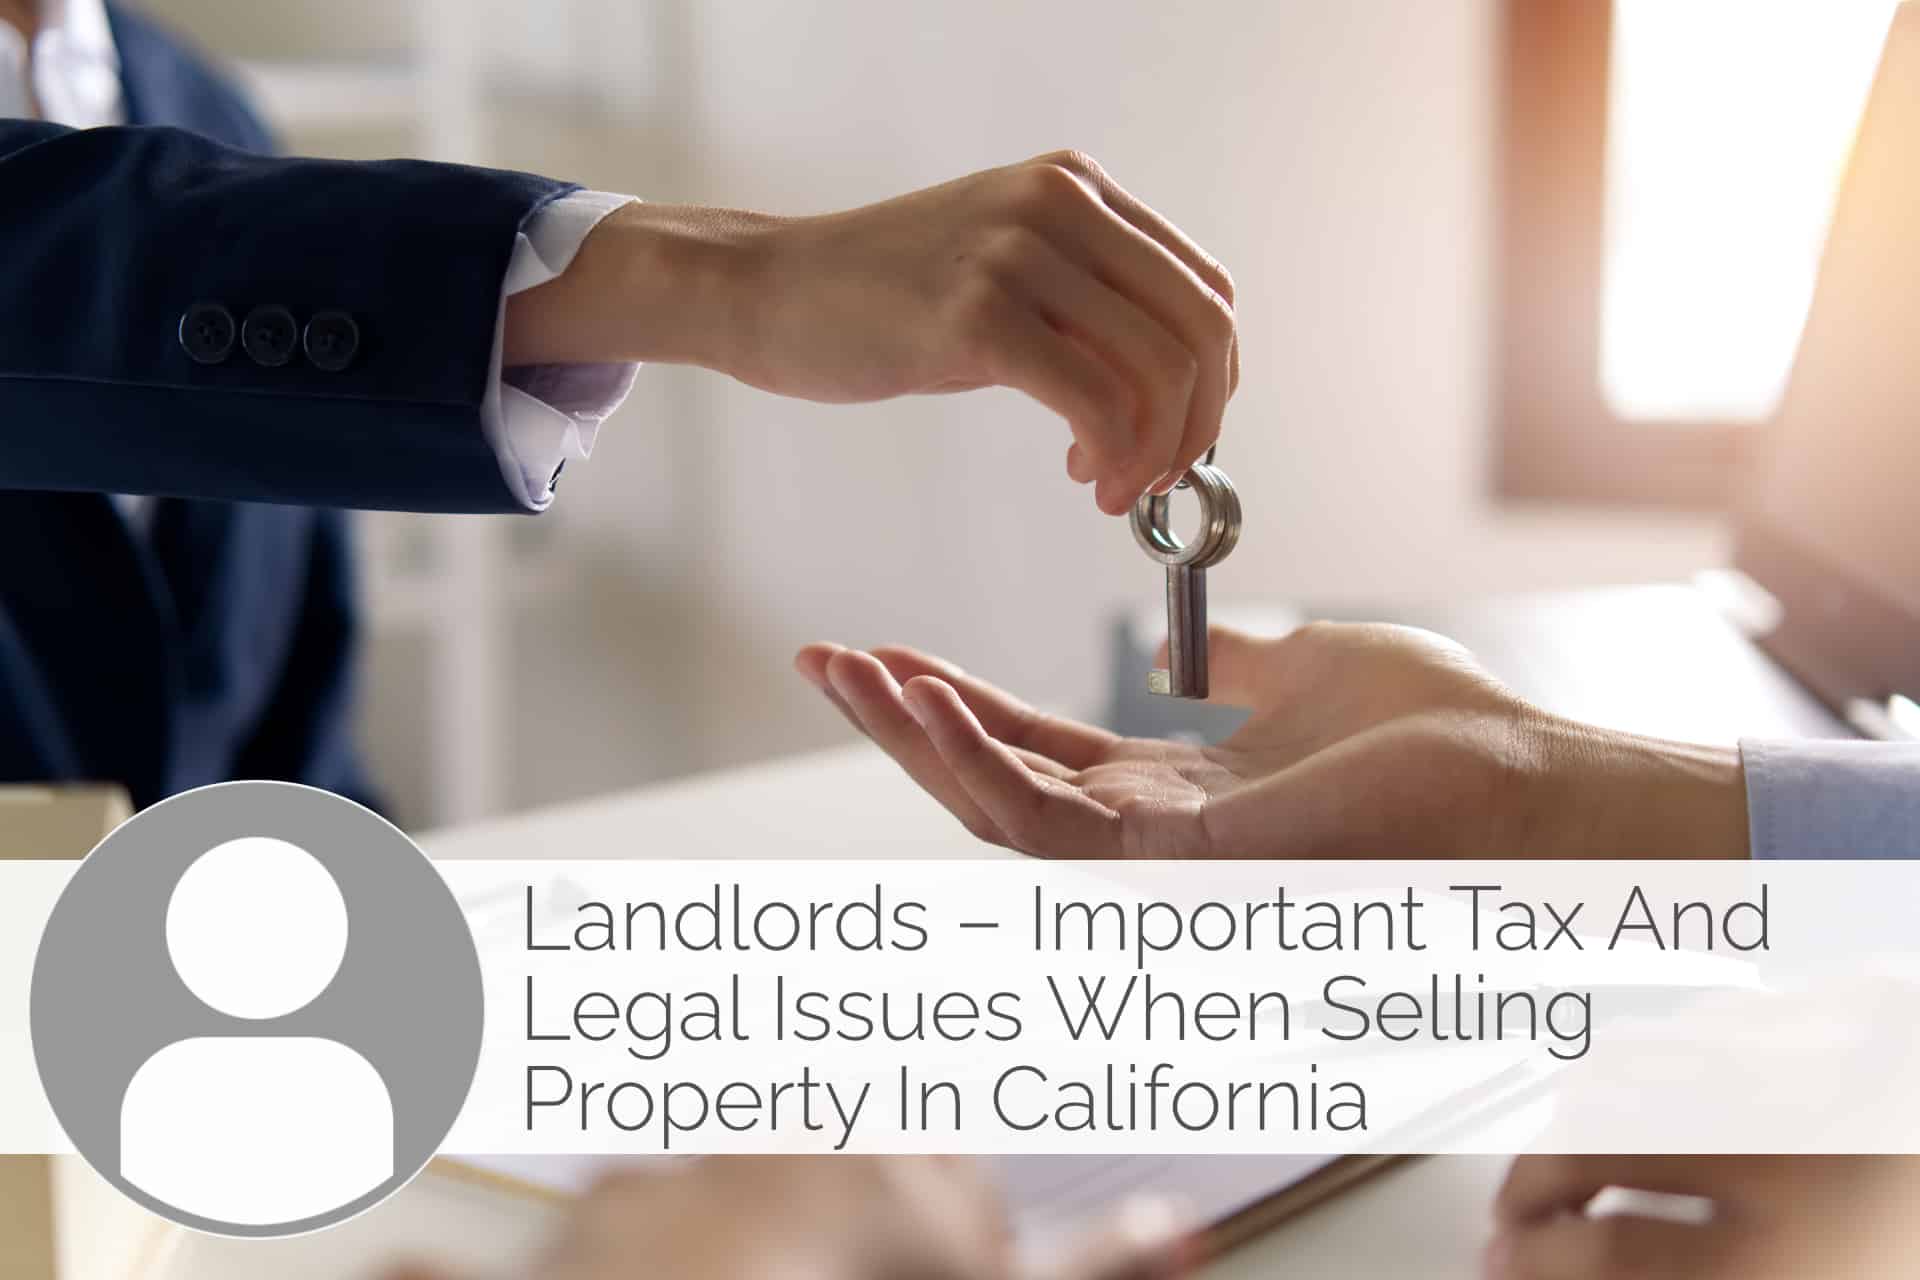 landlords, selling property, california, taxes